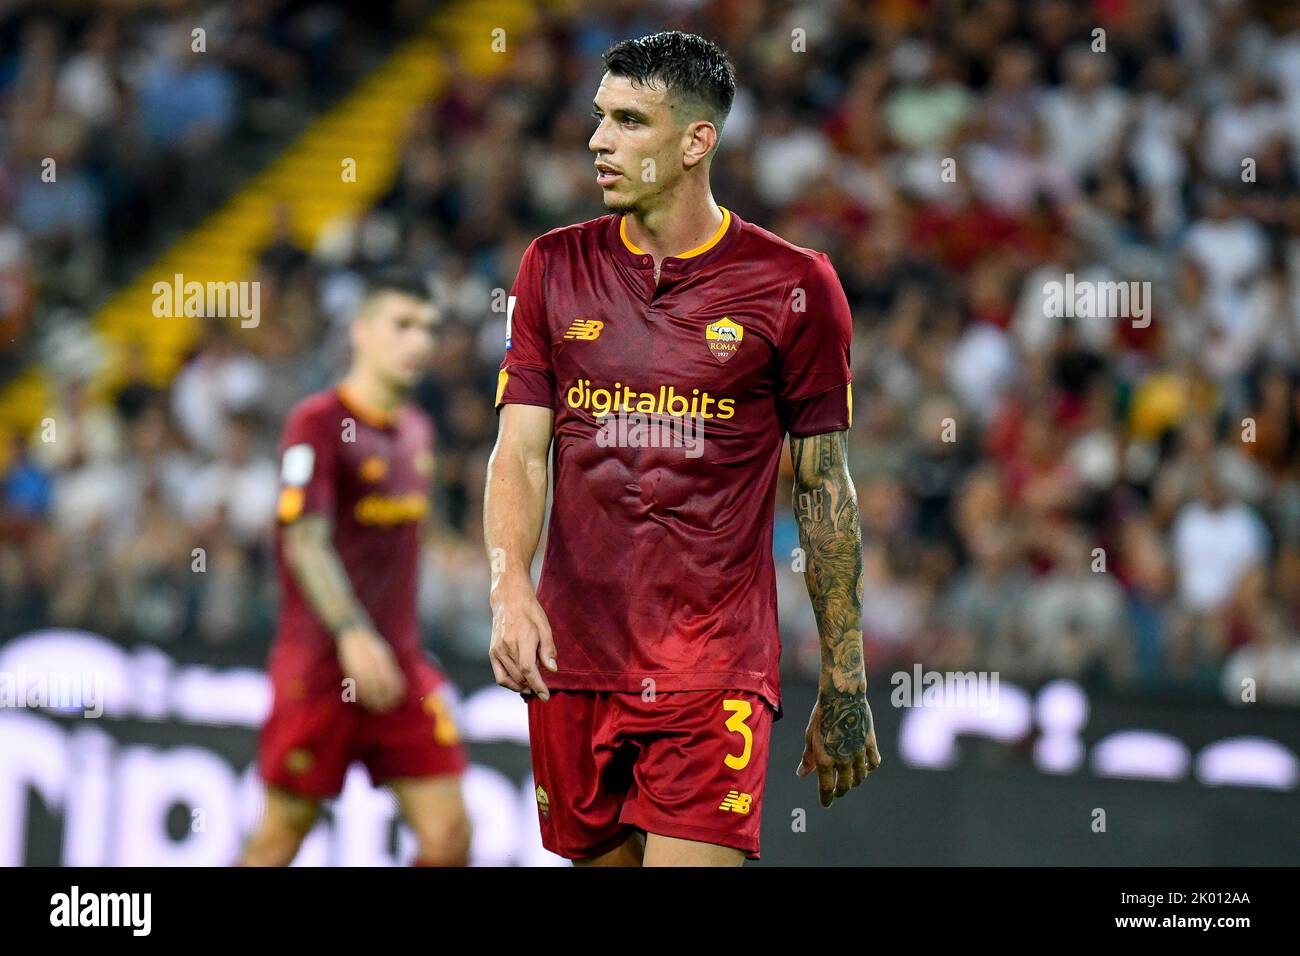 Udine, Italy. 04th Sep, 2022. Roma's Roger Ibanez da Silva portrait during Udinese Calcio vs AS Roma, italian soccer Serie A match in Udine, Italy, September 04 2022 Credit: Independent Photo Agency/Alamy Live News Stock Photo